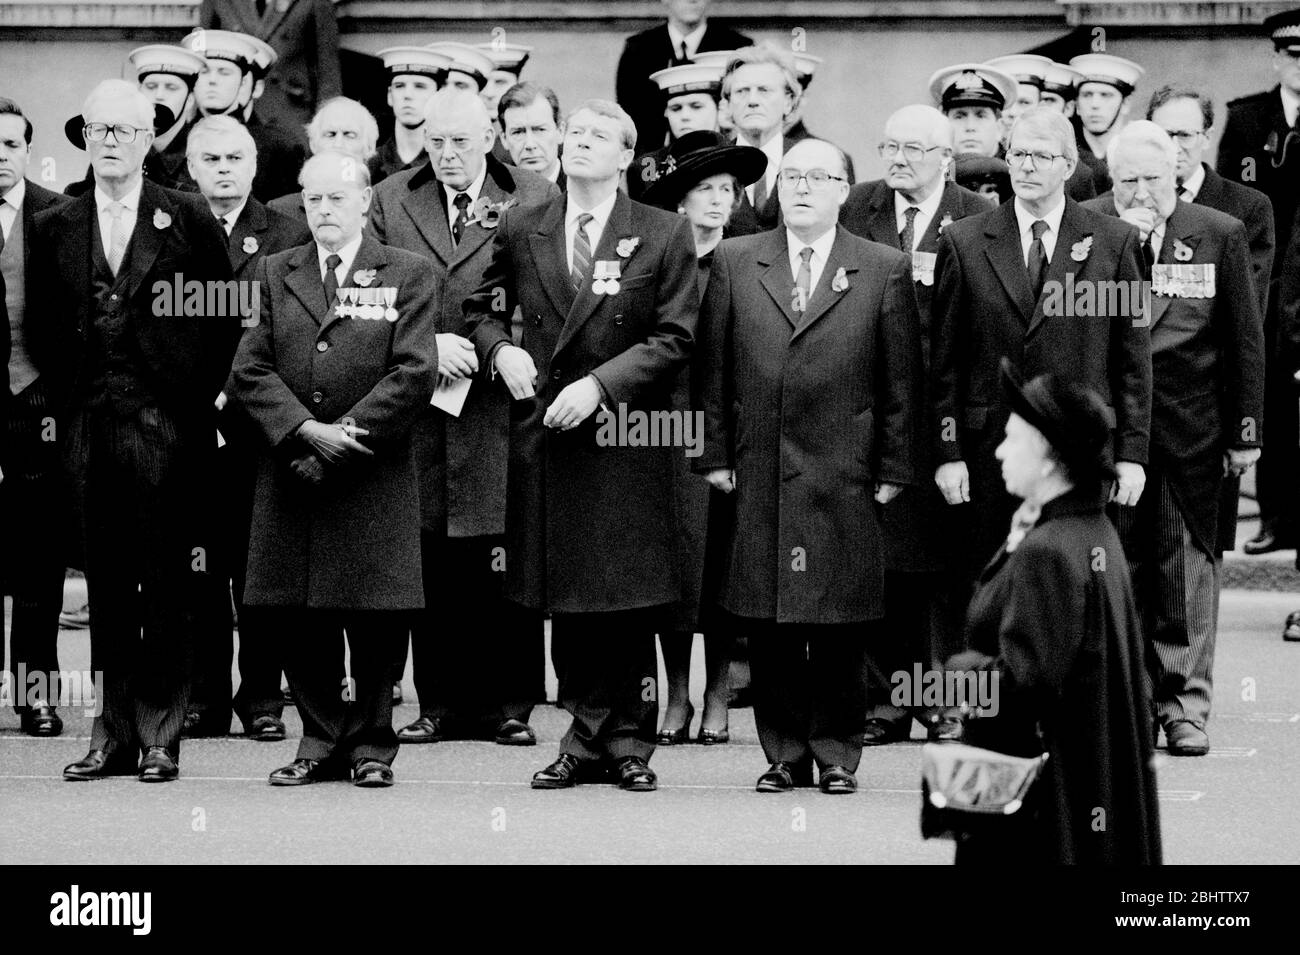 The Queen at the Cenotaph in London on Remembrance Sunday, watched by politicians including John Major, Margaret Thatcher, James Callaghan, Ian Paisley, Edward Heath, Norman Lamont, John Smith, Paddy Ashdown and Douglas Hurd. Stock Photo